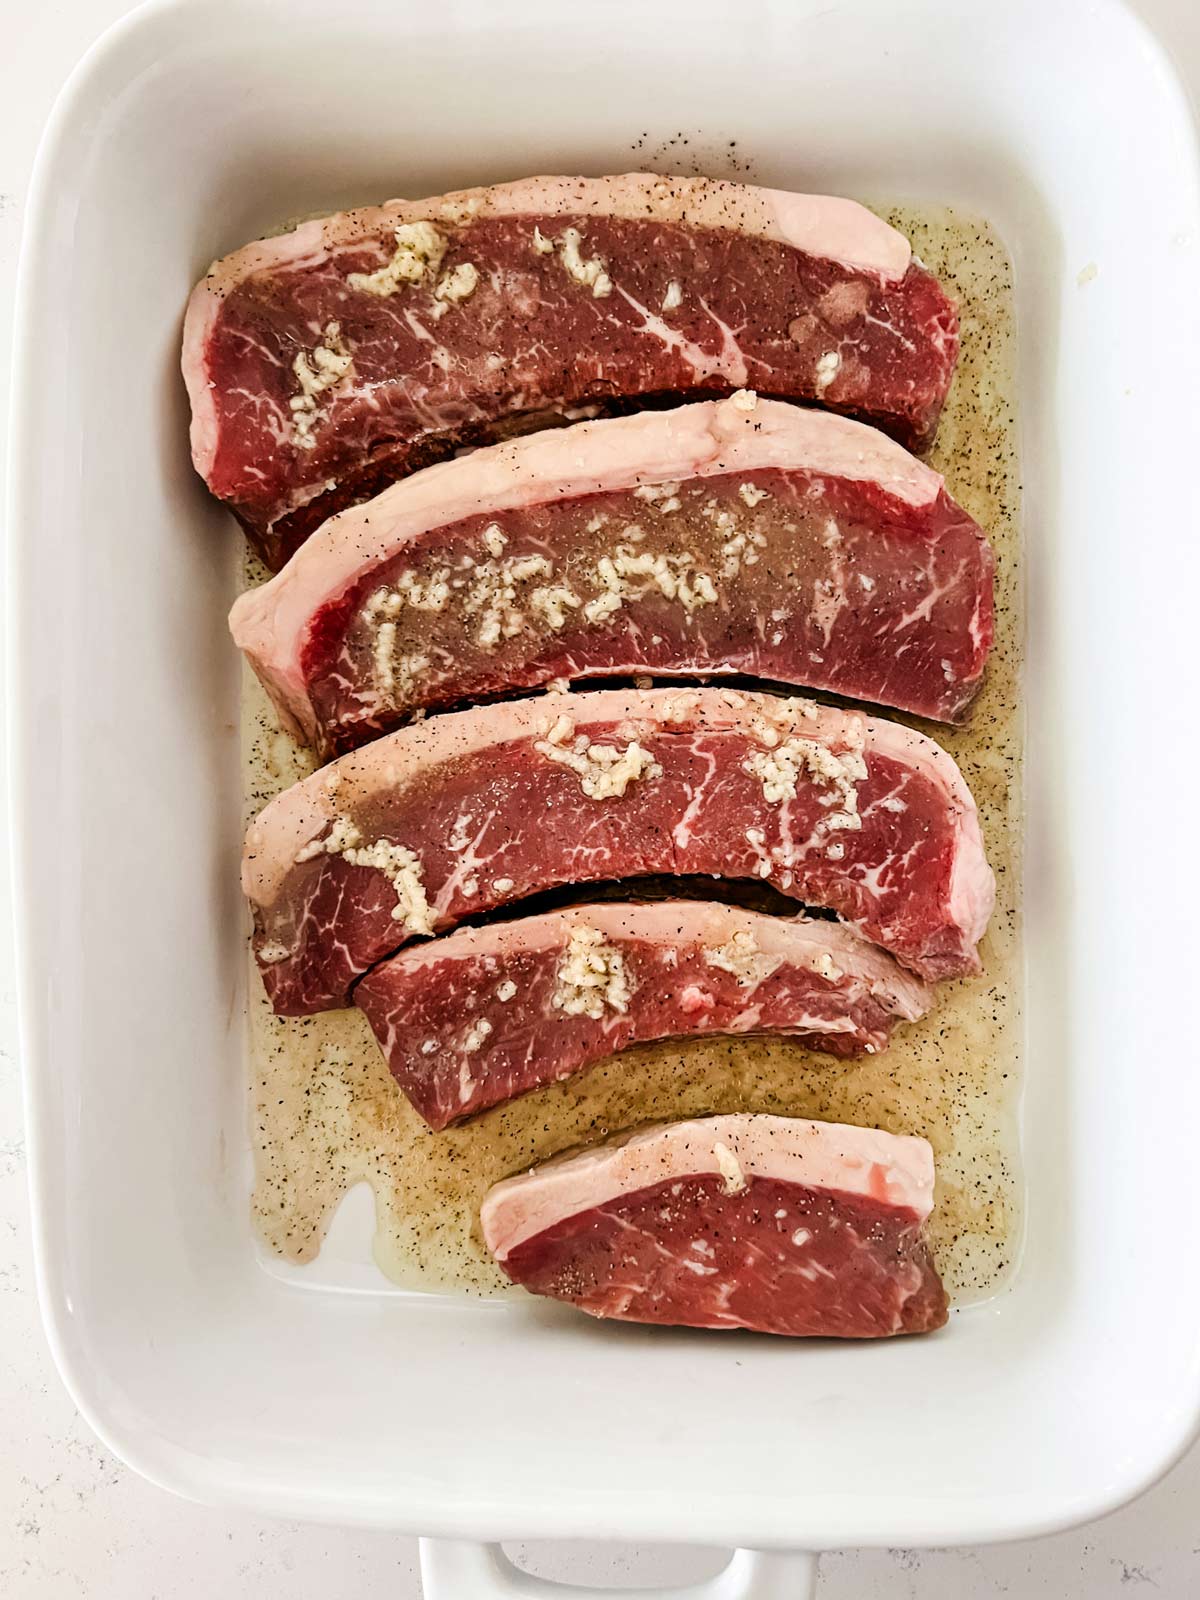 Picanha steaks marinating in a shallow dish.